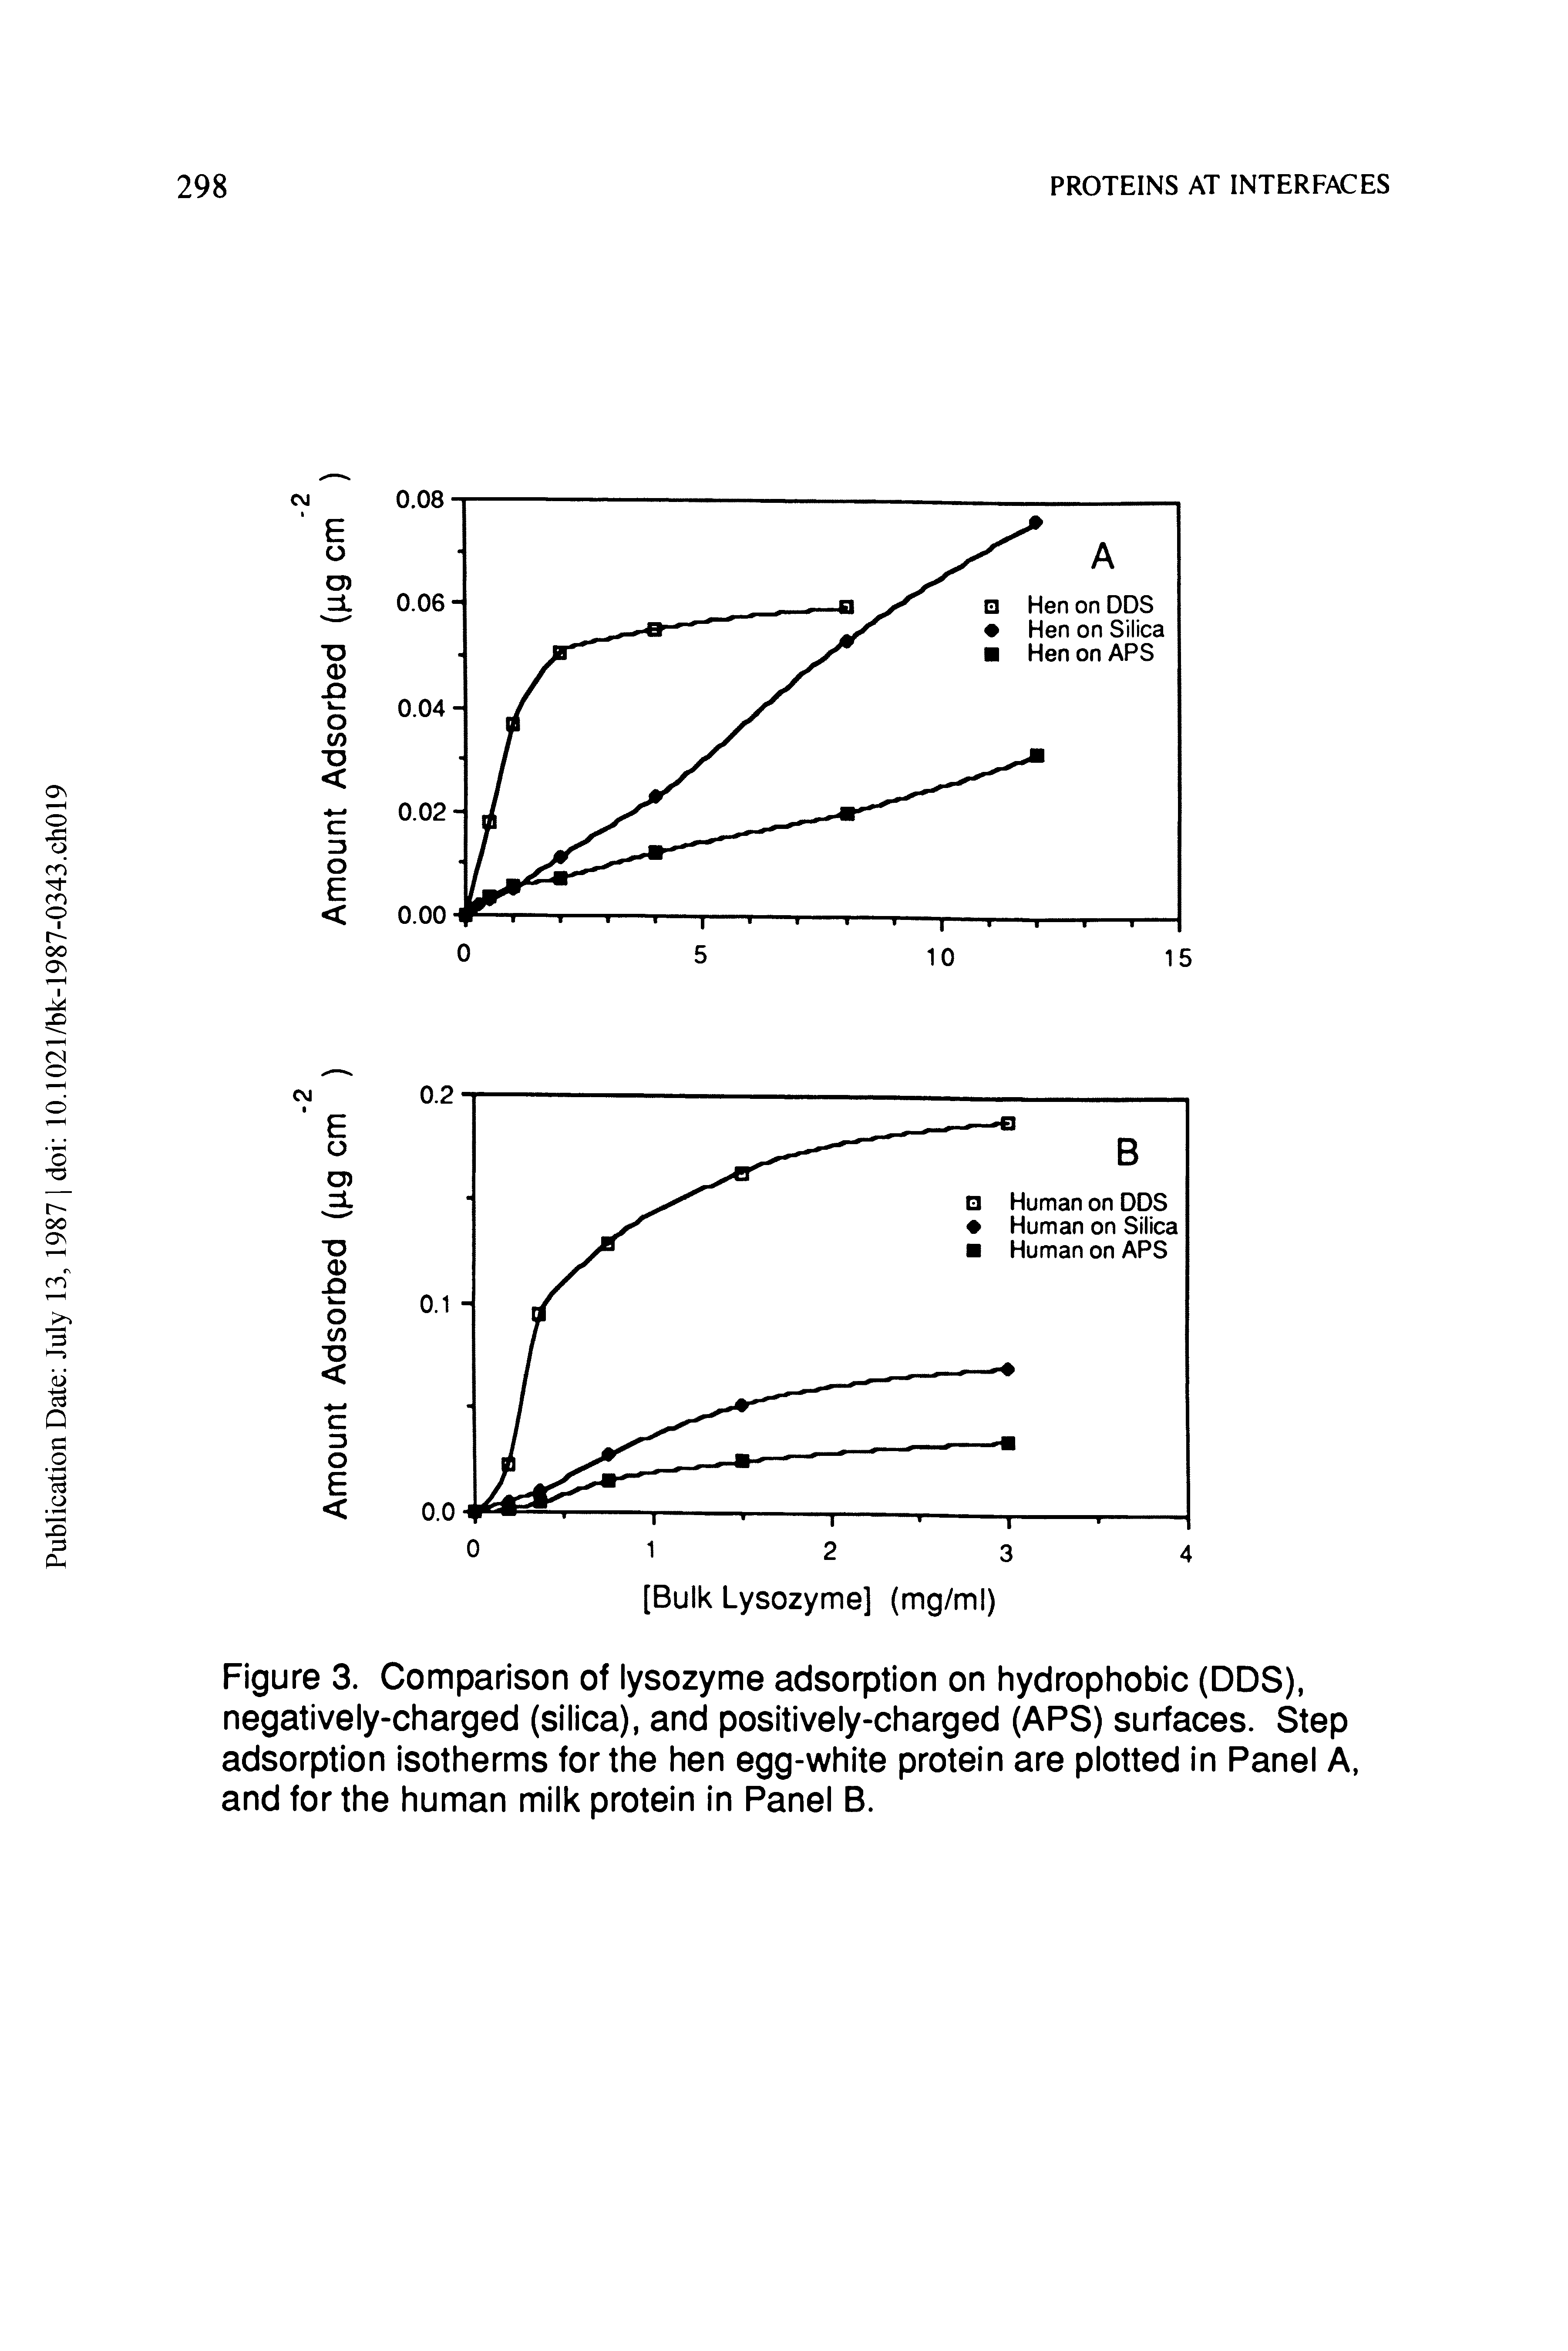 Figure 3. Comparison of lysozyme adsorption on hydrophobic (DDS), negatively-charged (silica), and positively-charged (APS) surfaces. Step adsorption isotherms for the hen egg-white protein are plotted in Panel A, and for the human milk protein in Panel B.